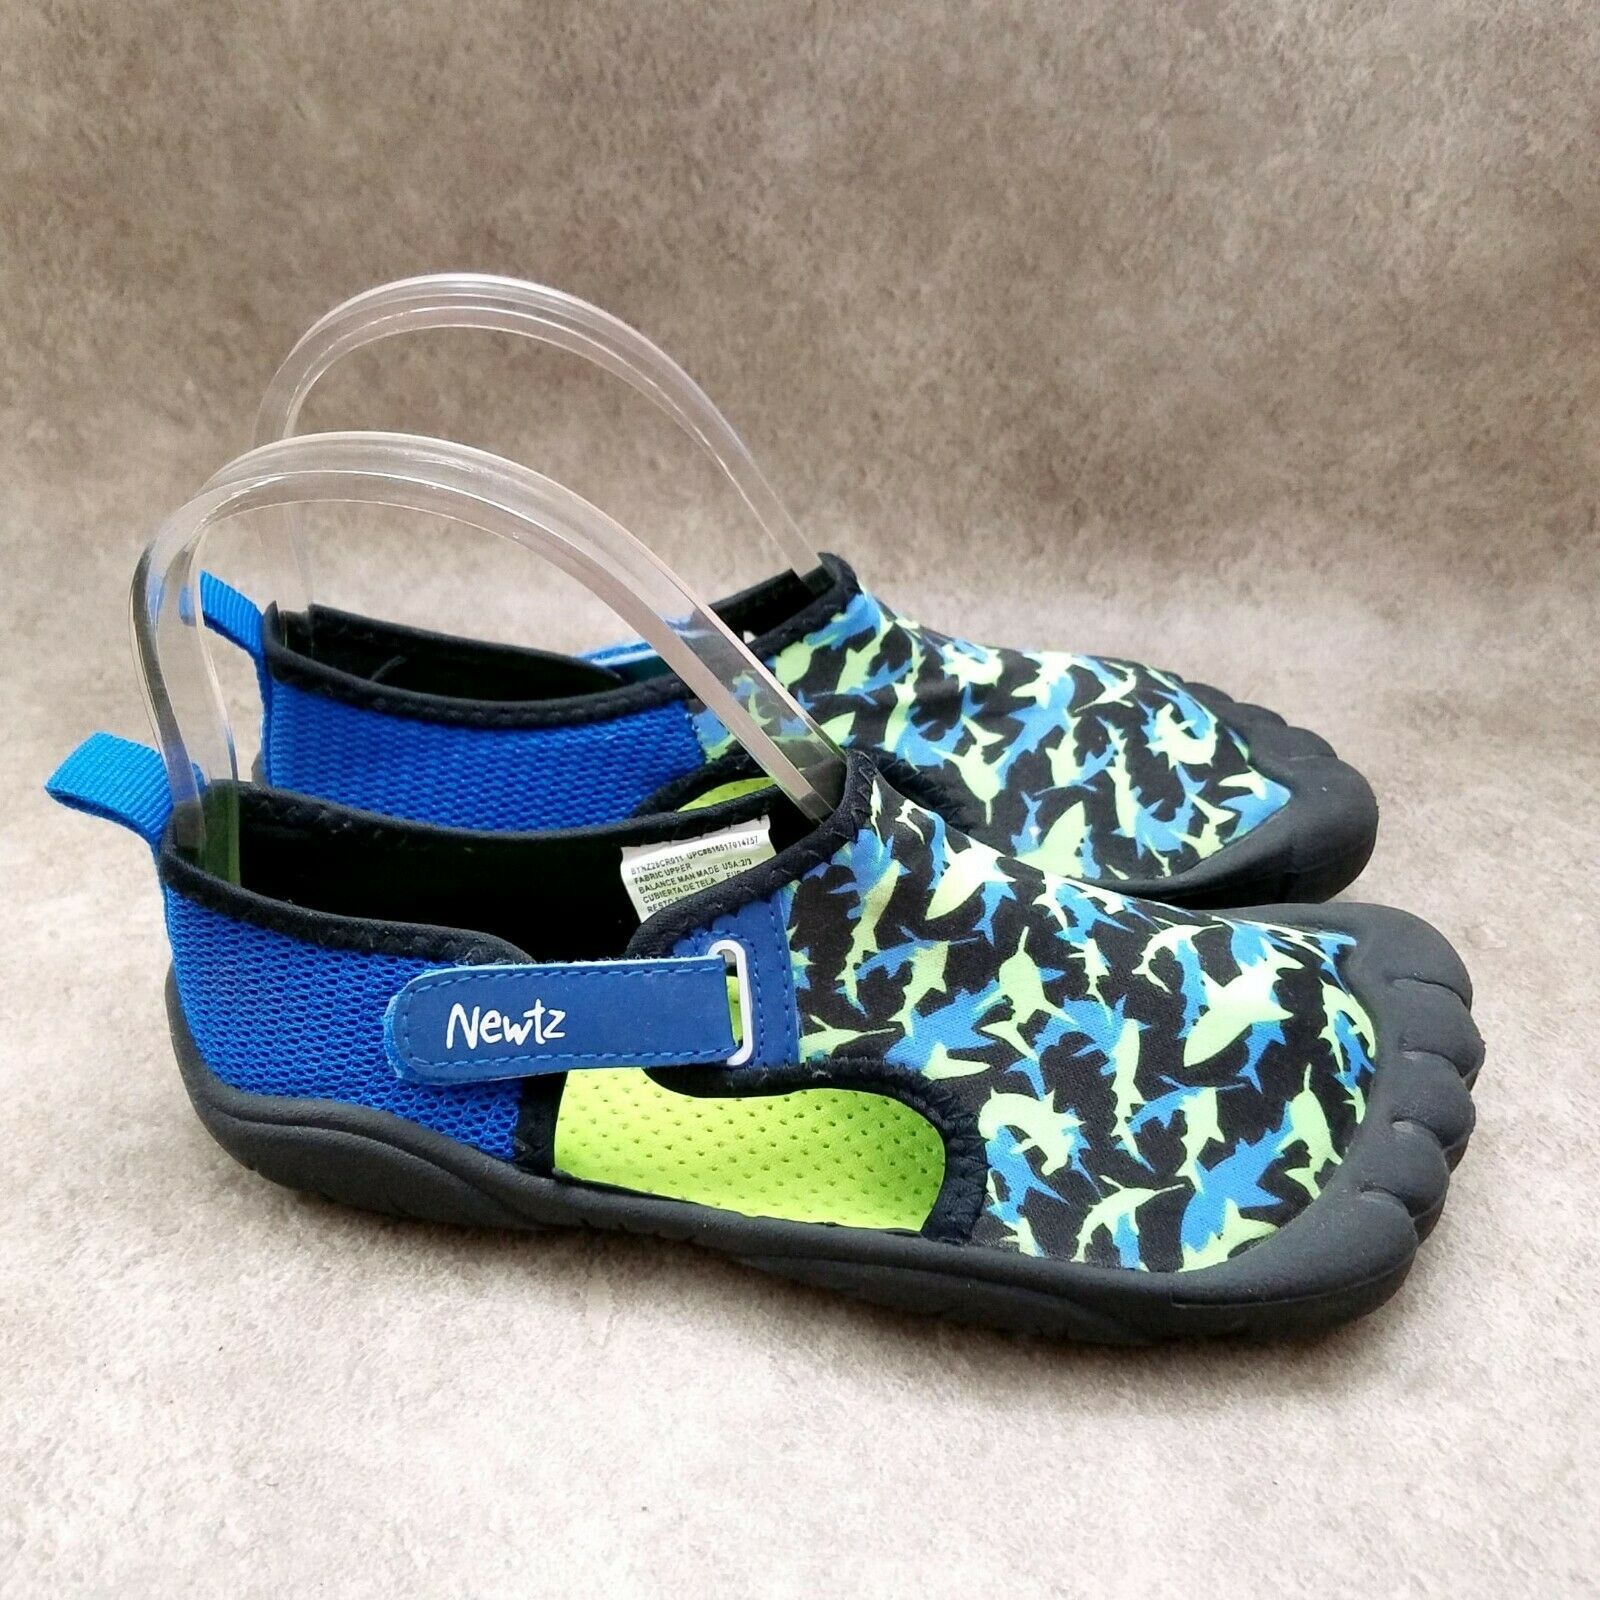 KIDS NEWTZ WATER SHOES ~ SIZES 11-12 13-1 & 6 ~ ALL DAY COMFORT ~ Free shipping 